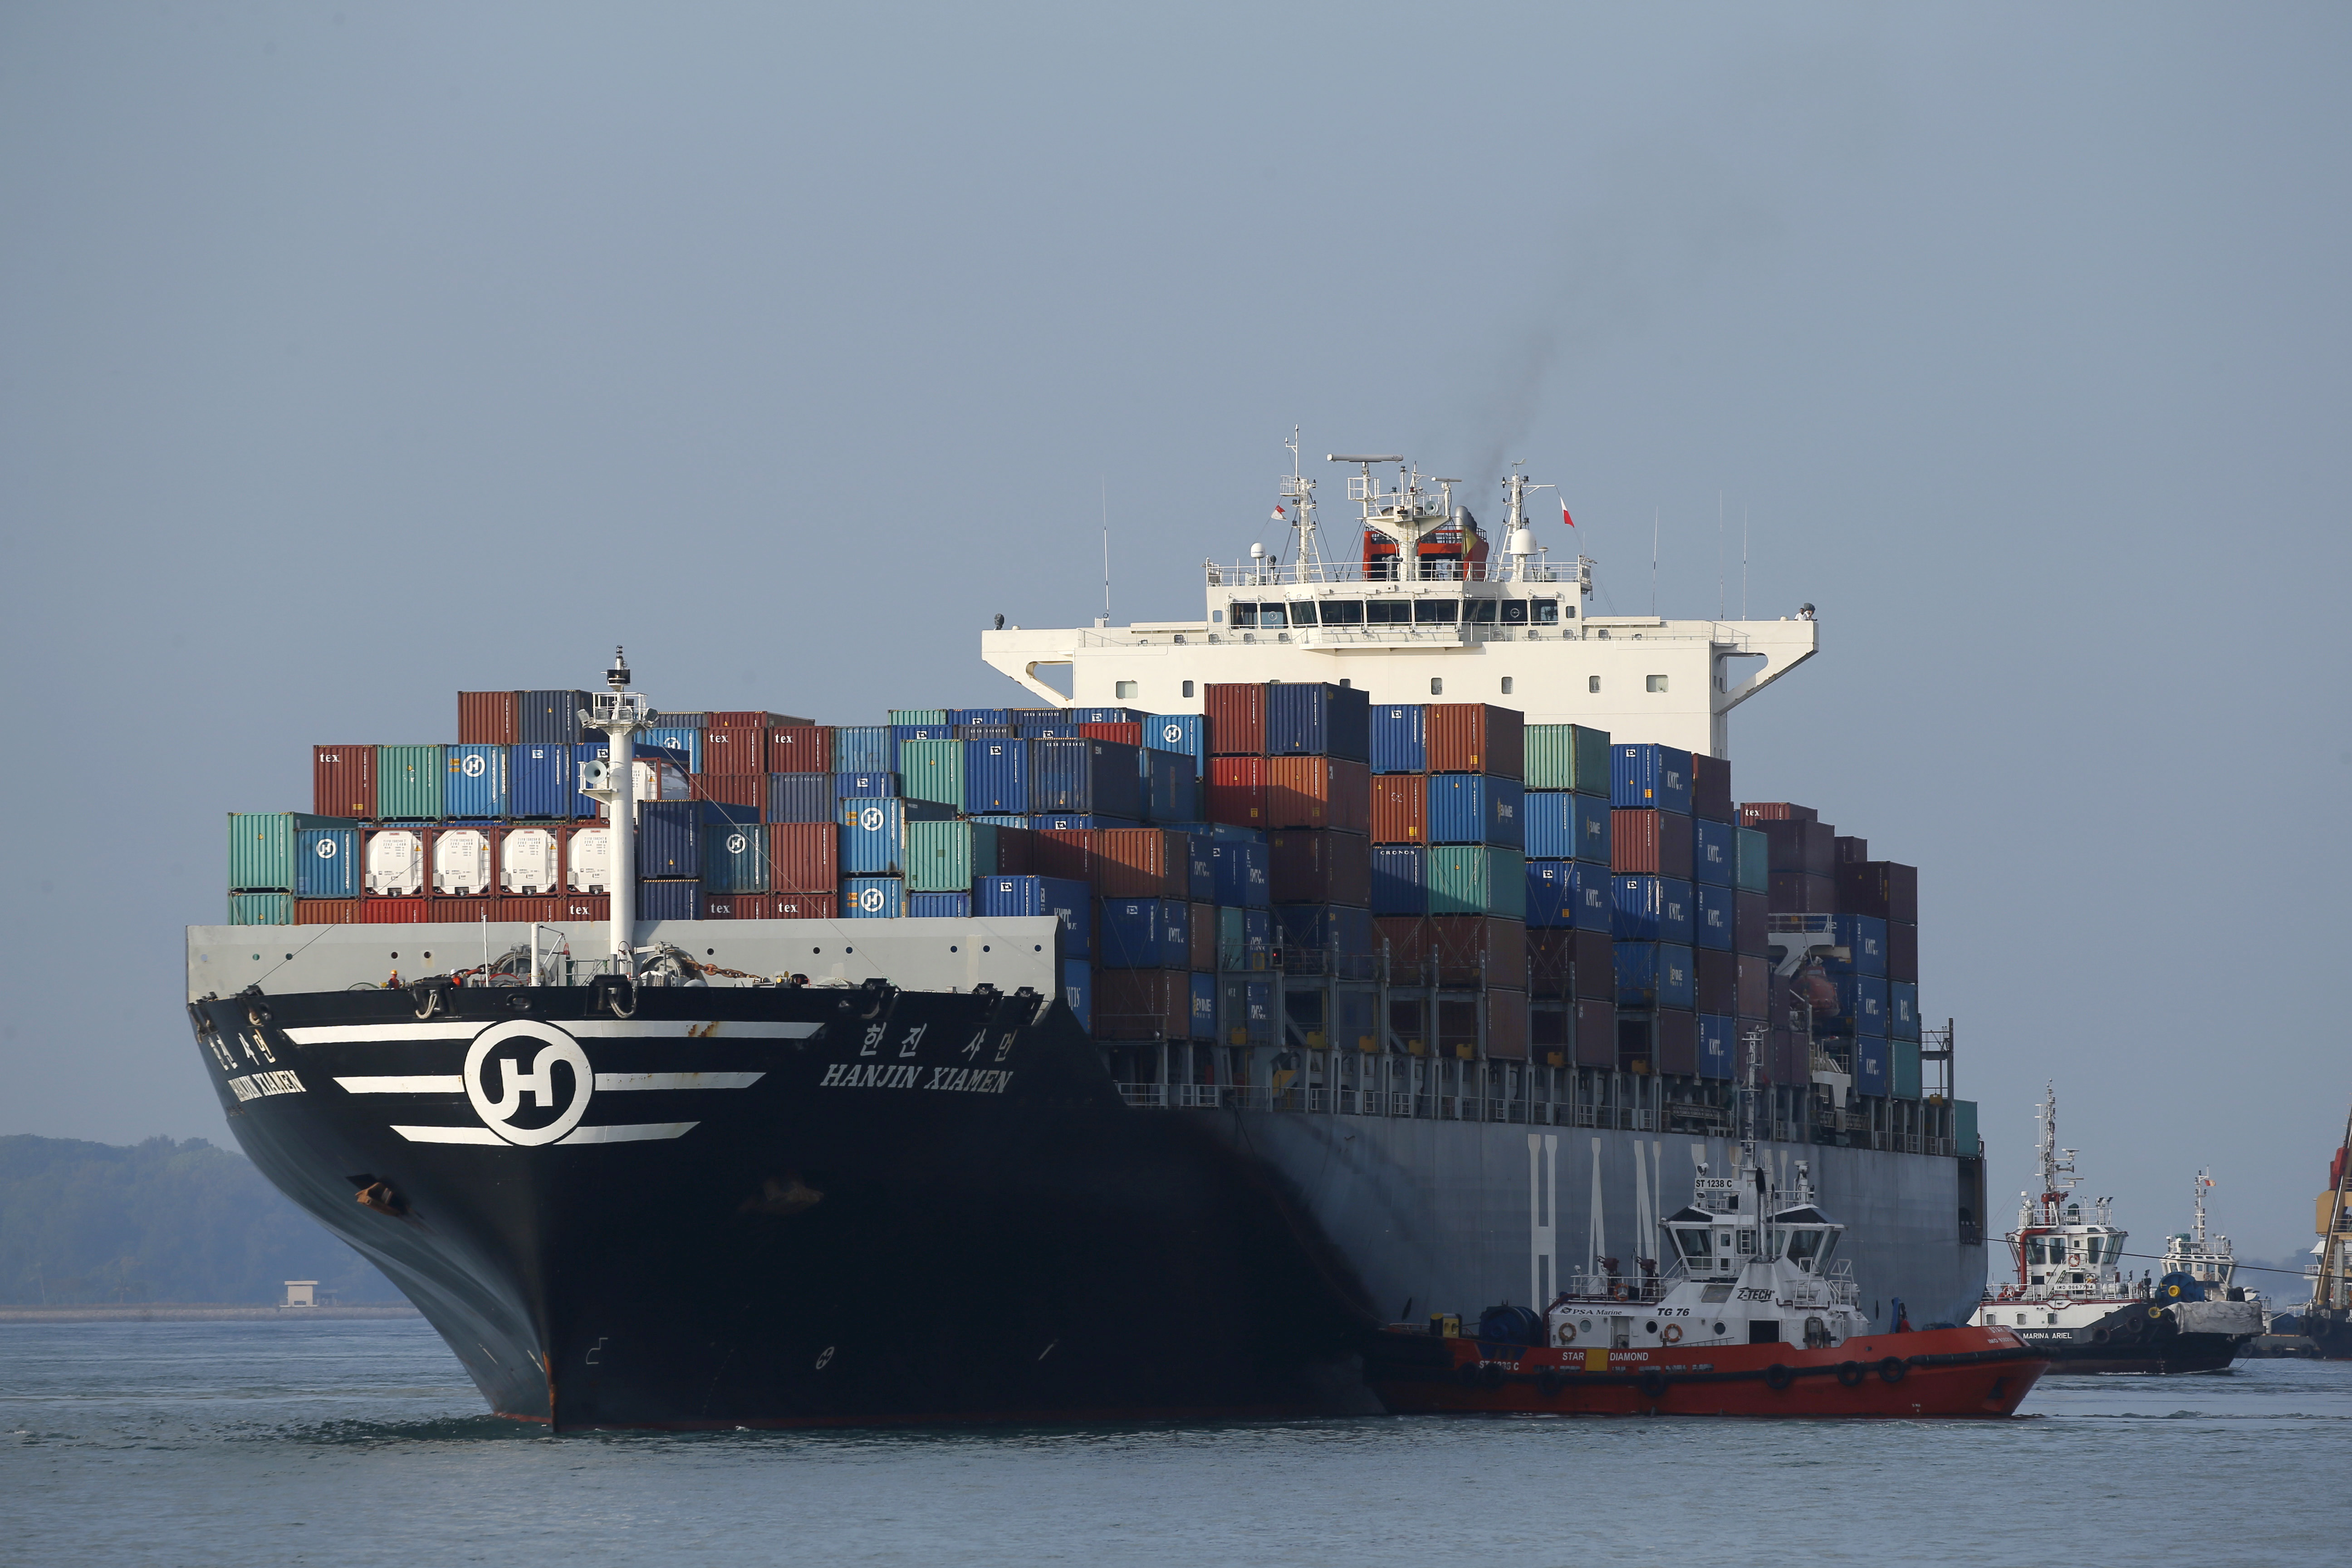 A ship prepares to dock at PSA's Tanjong Pagar container port in Singapore